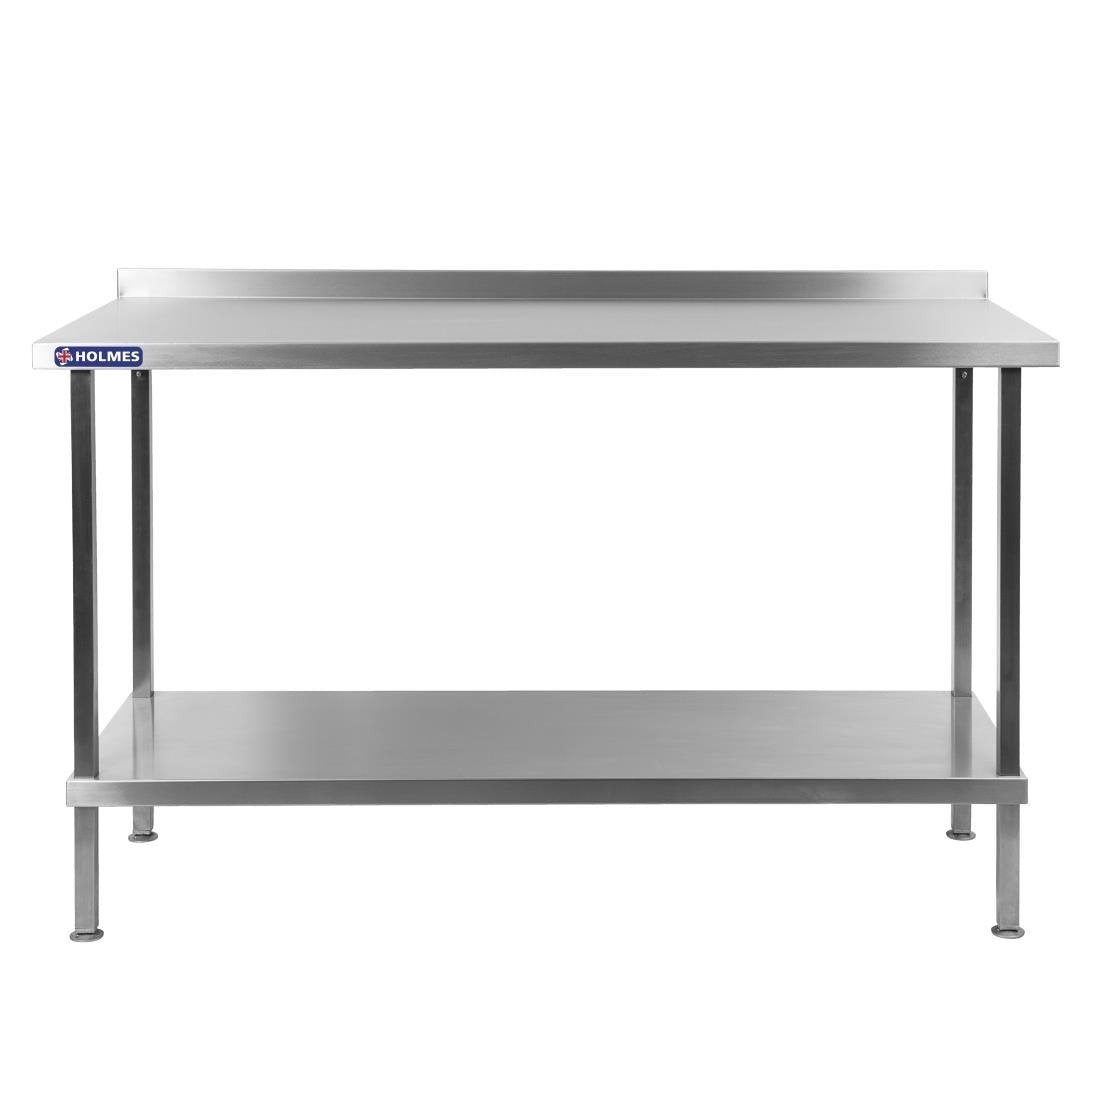 DR037 Holmes Stainless Steel Wall Table 1500mm JD Catering Equipment Solutions Ltd